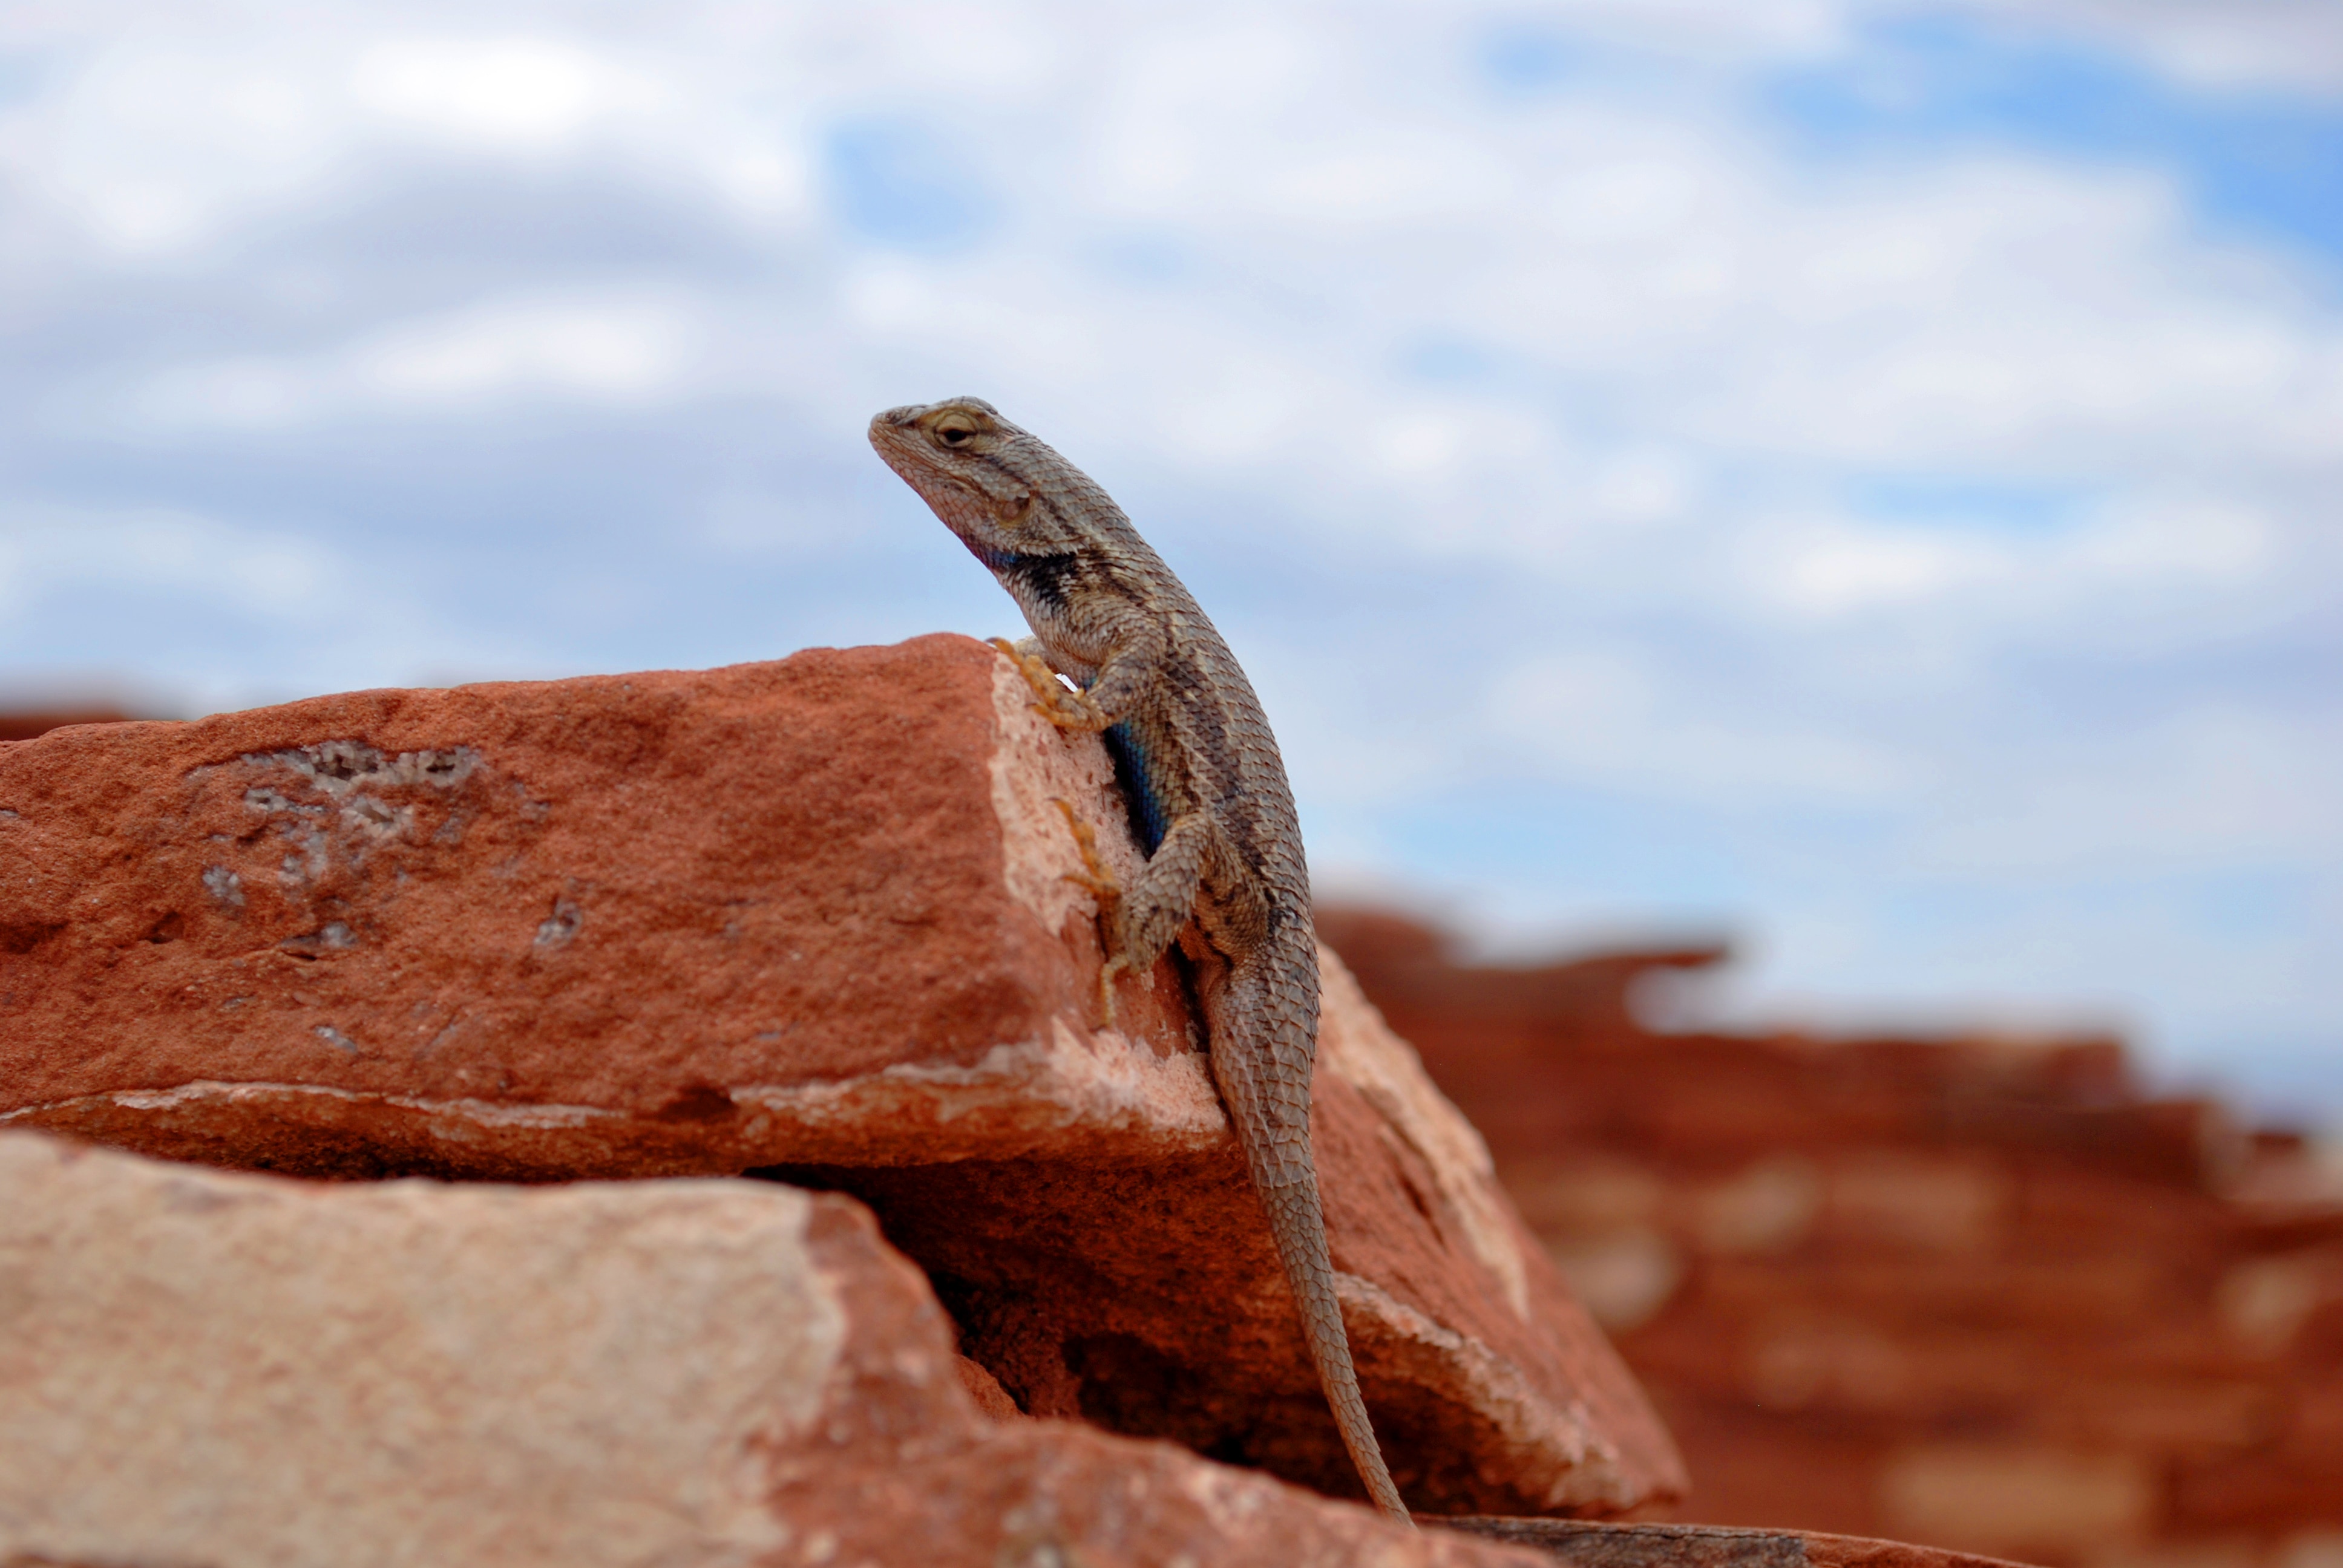 brown lizard in stone during daytime